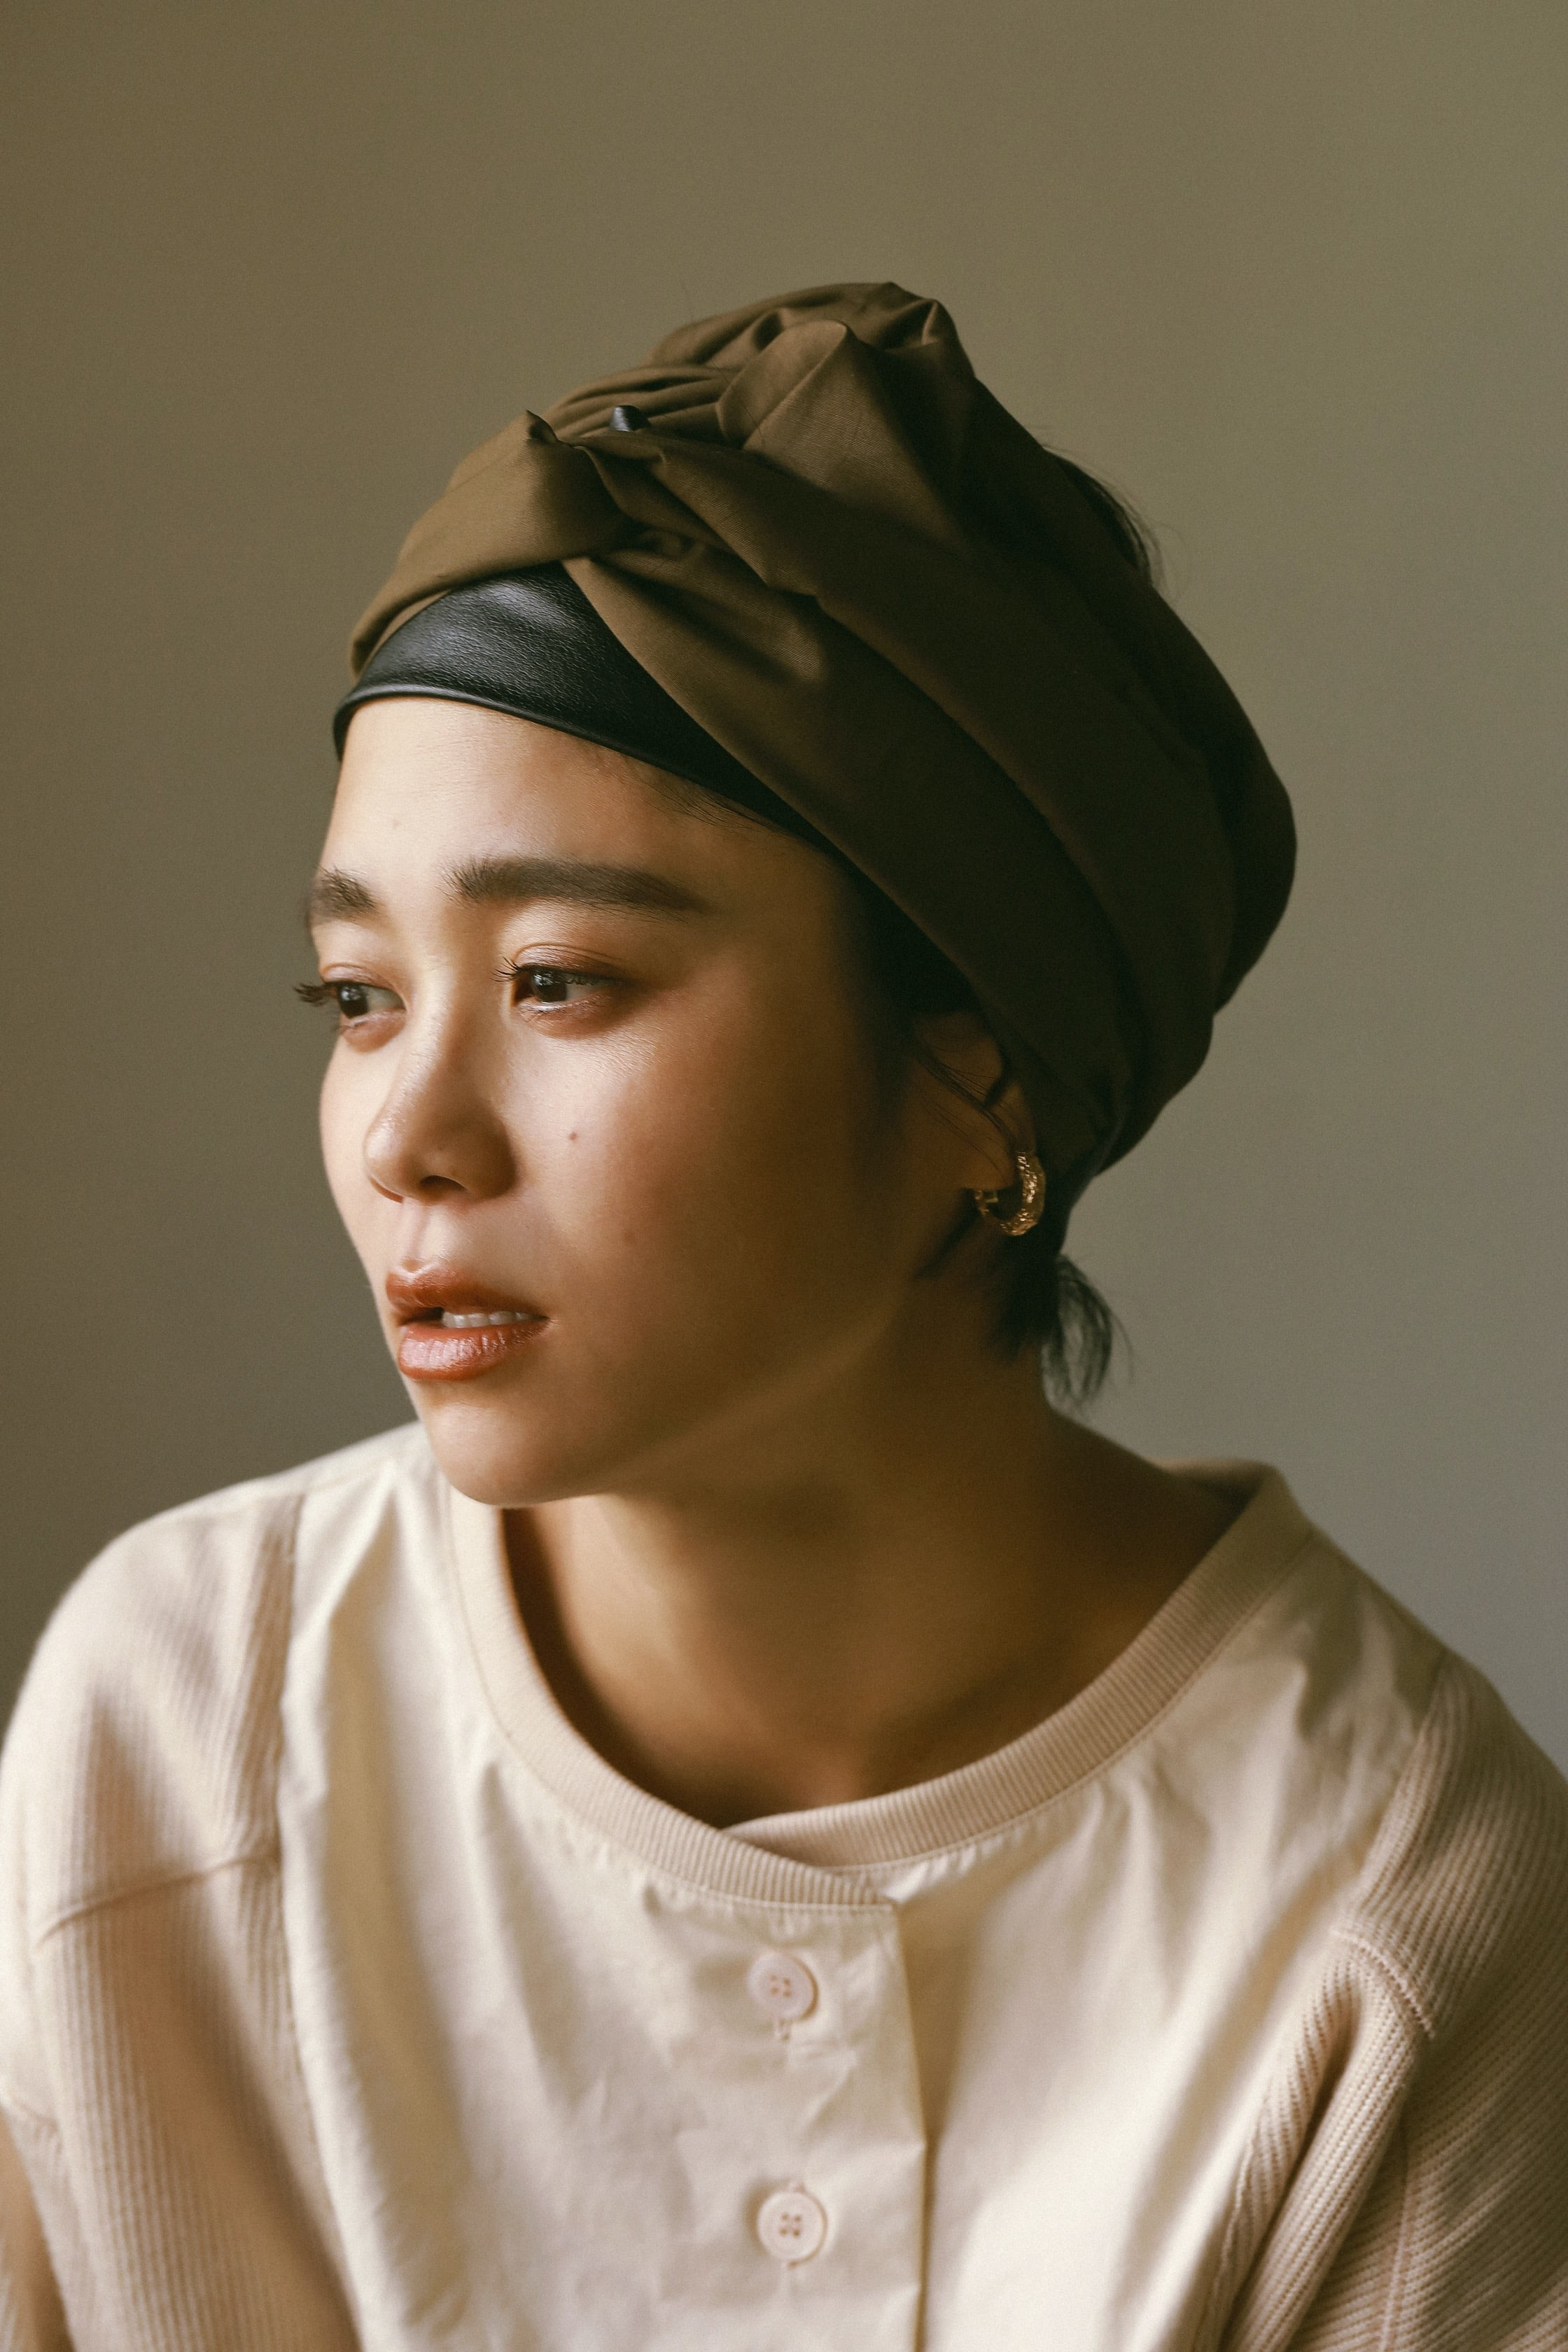 SYNTHETIC LEATHER × BROAD HAIR TURBAN | SEEMY STORE（シーミーストア）